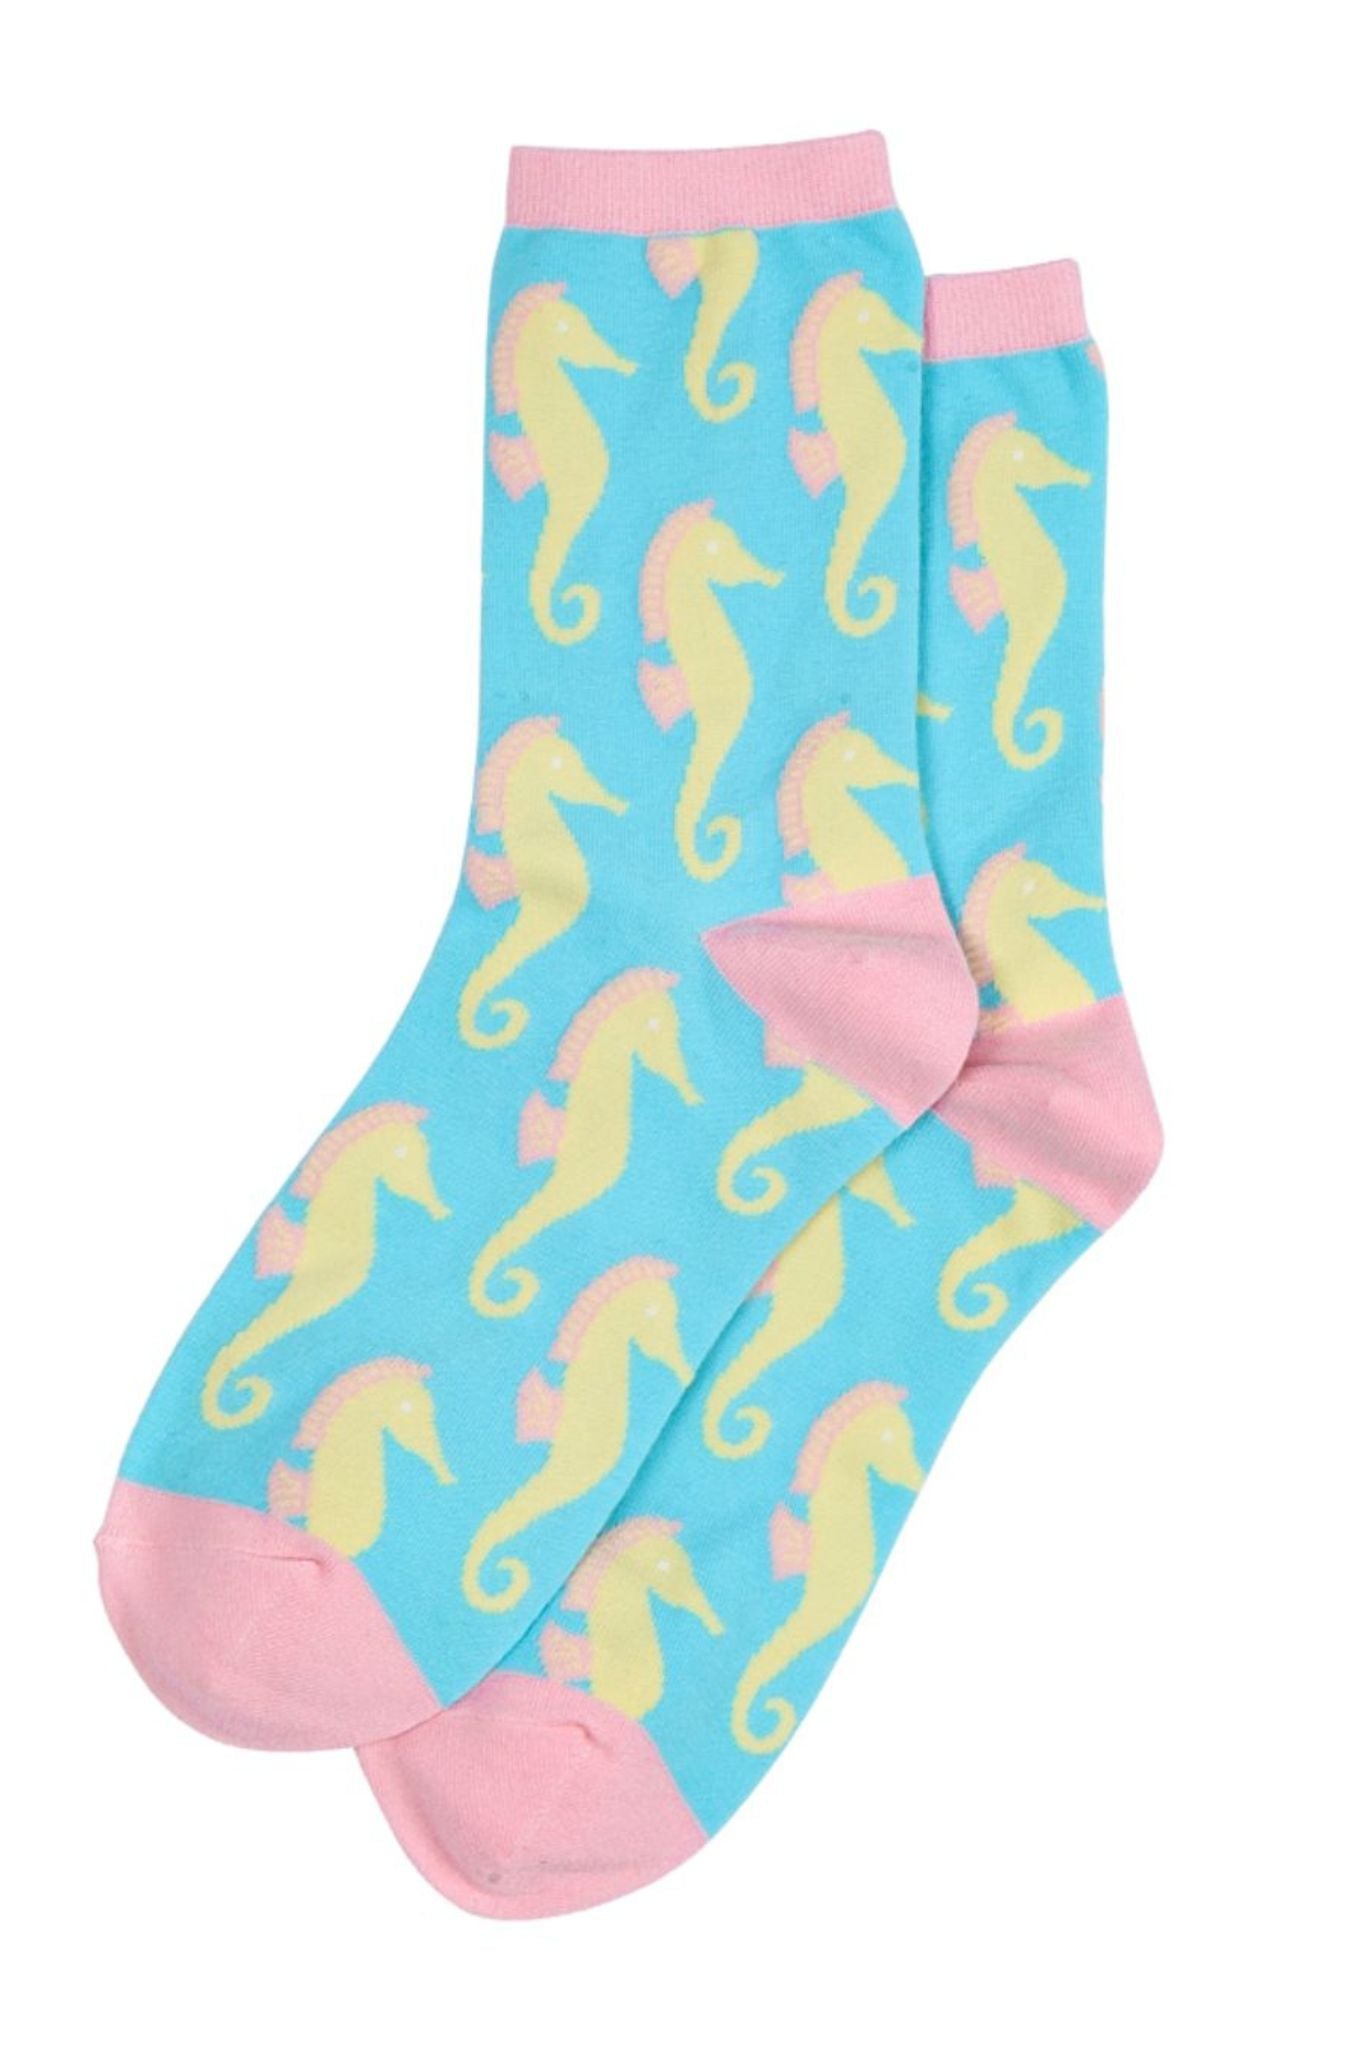 blue socks with an all over seahorse pattern